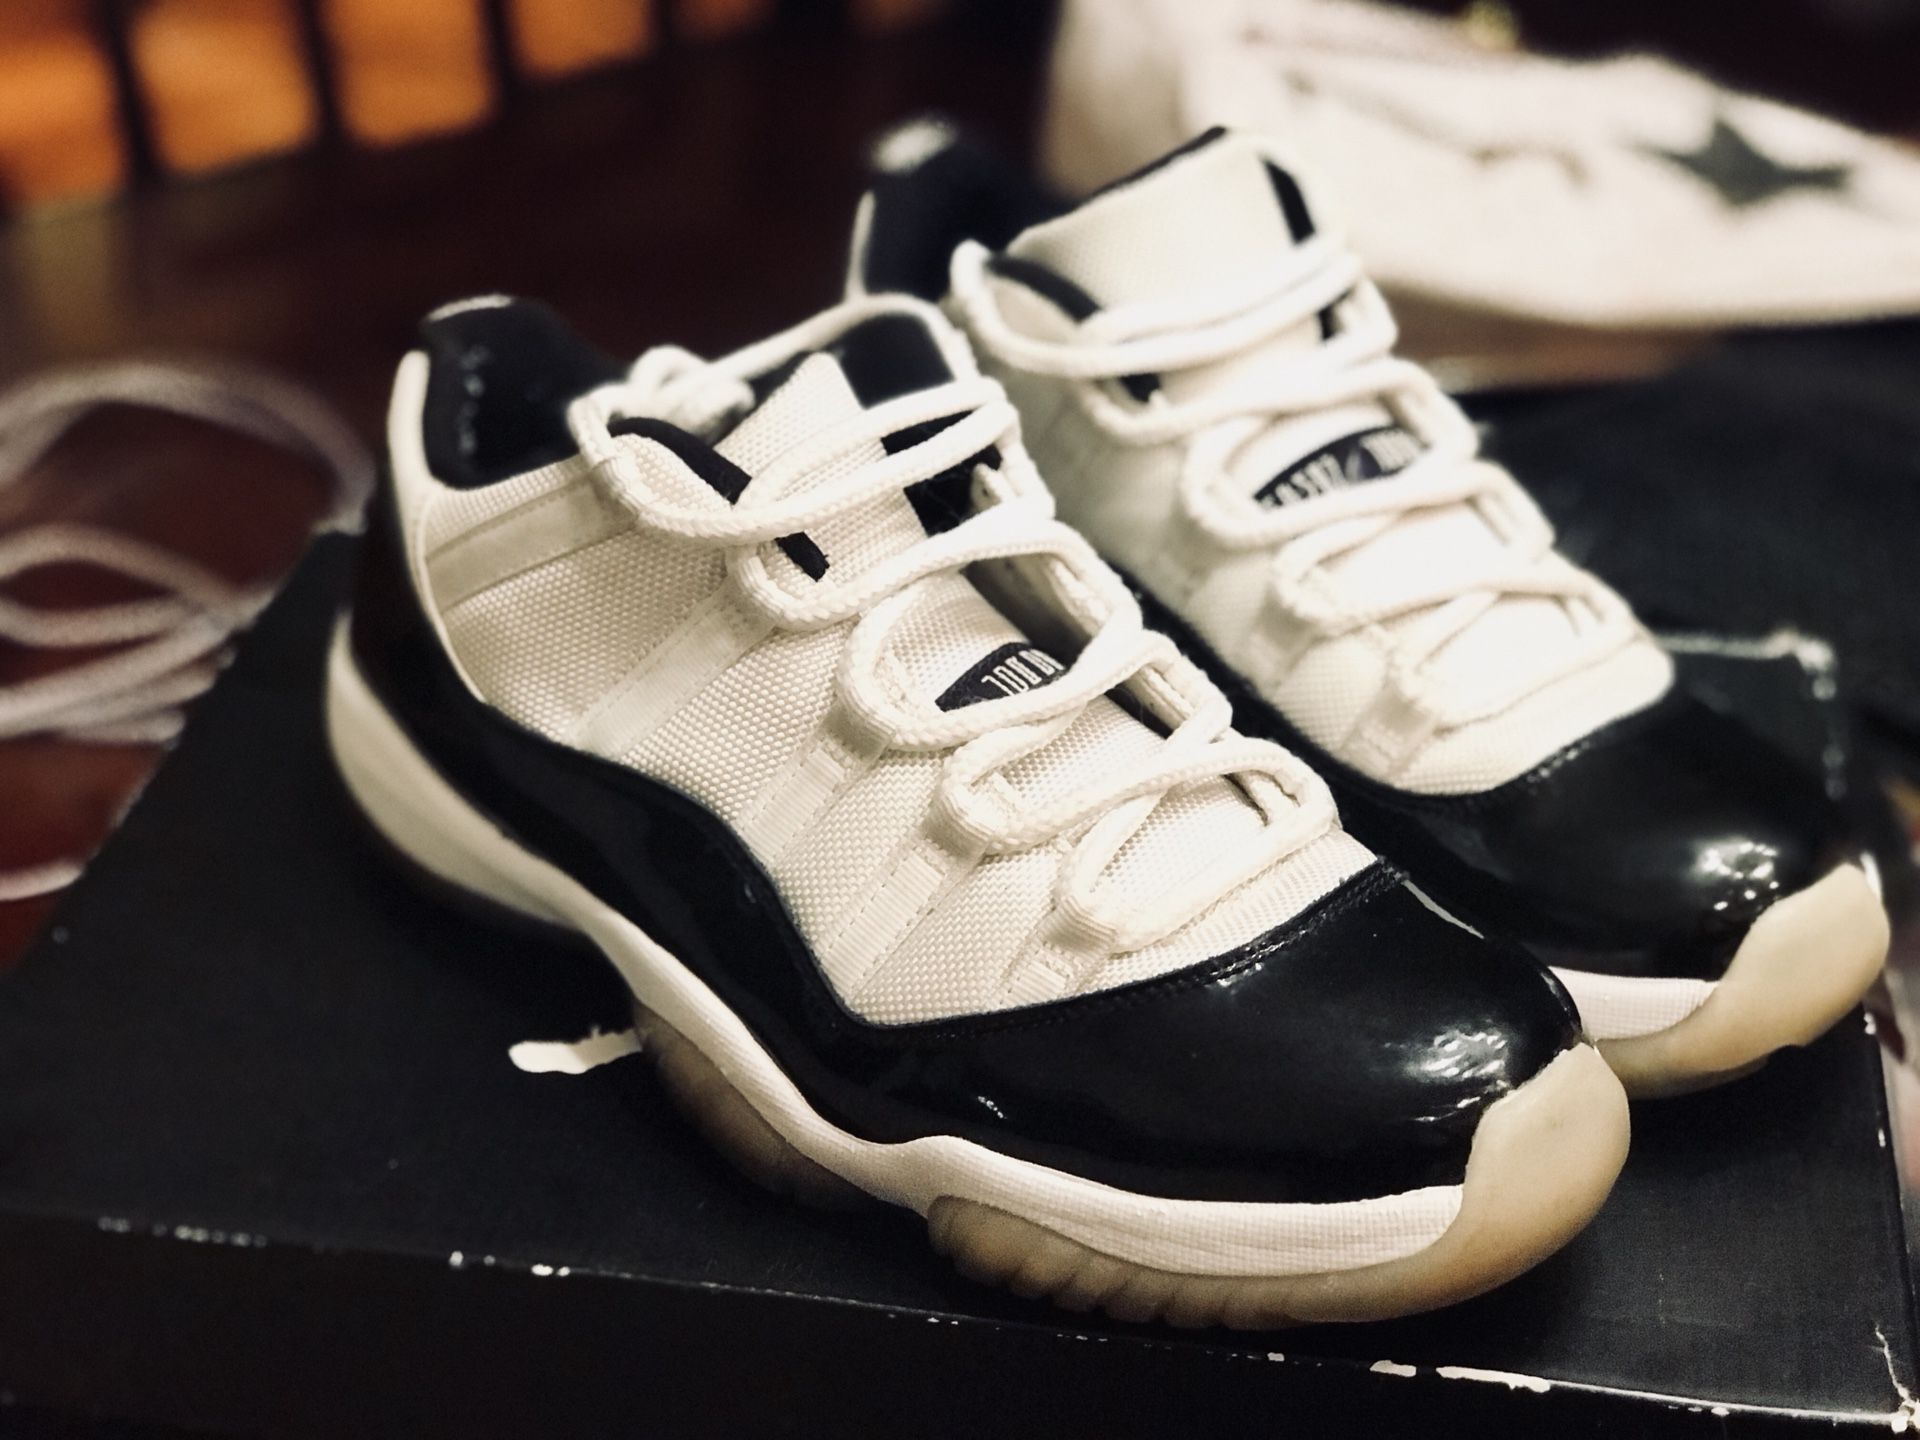 2 pairs of retro Jordans for sale - 11s Concords and 13s